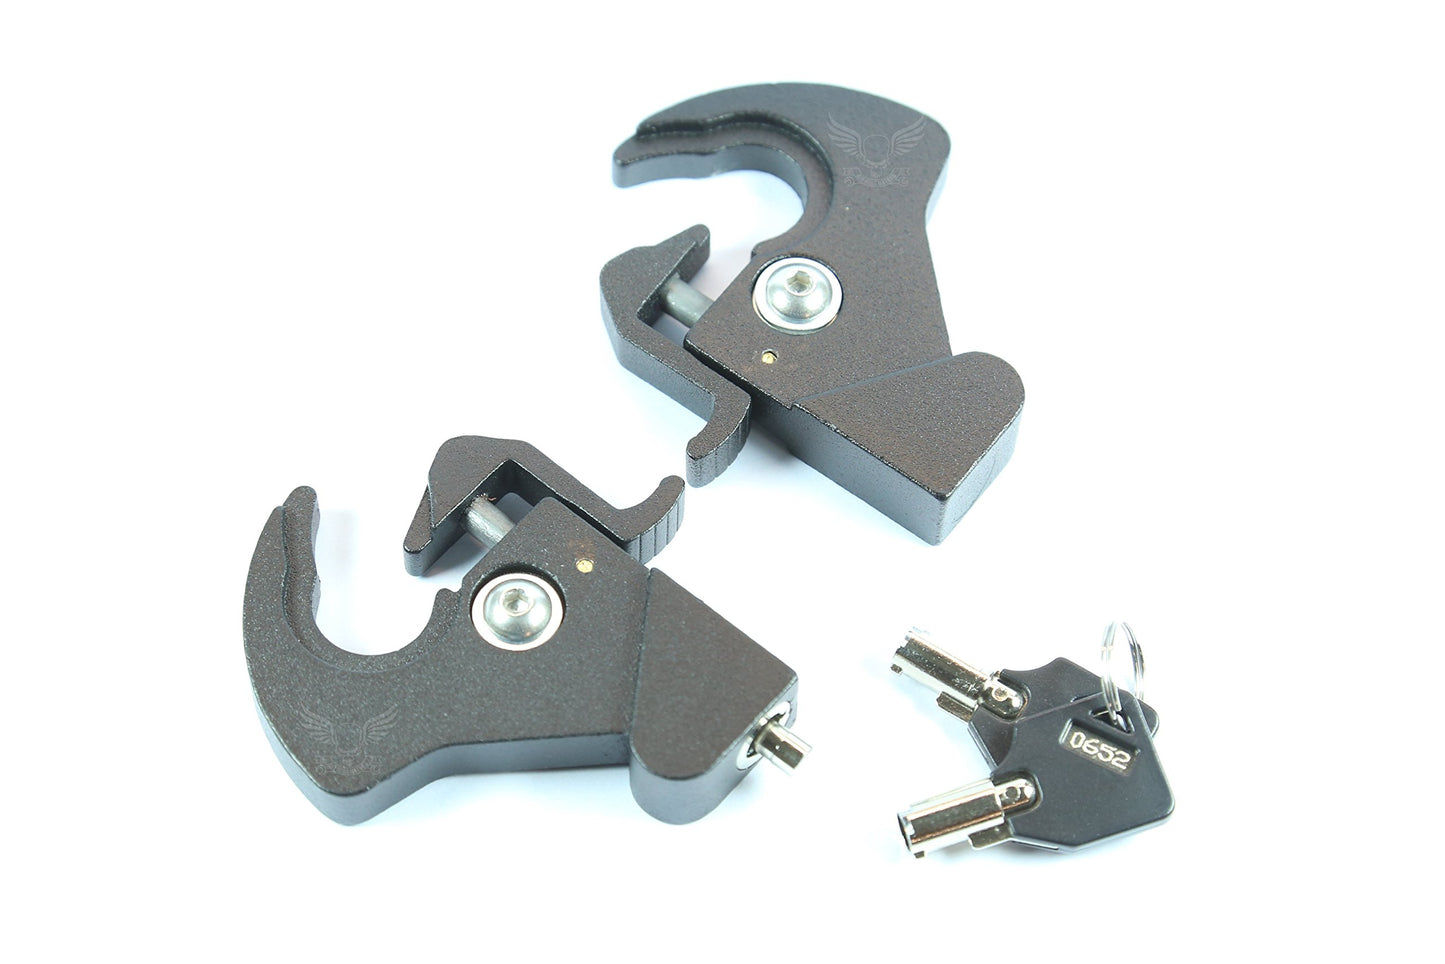 Locking Detachable Rotary Docking Latches Clips for Harley Davidson Sissy Bar or Luggage Rack (Lock with Keys)